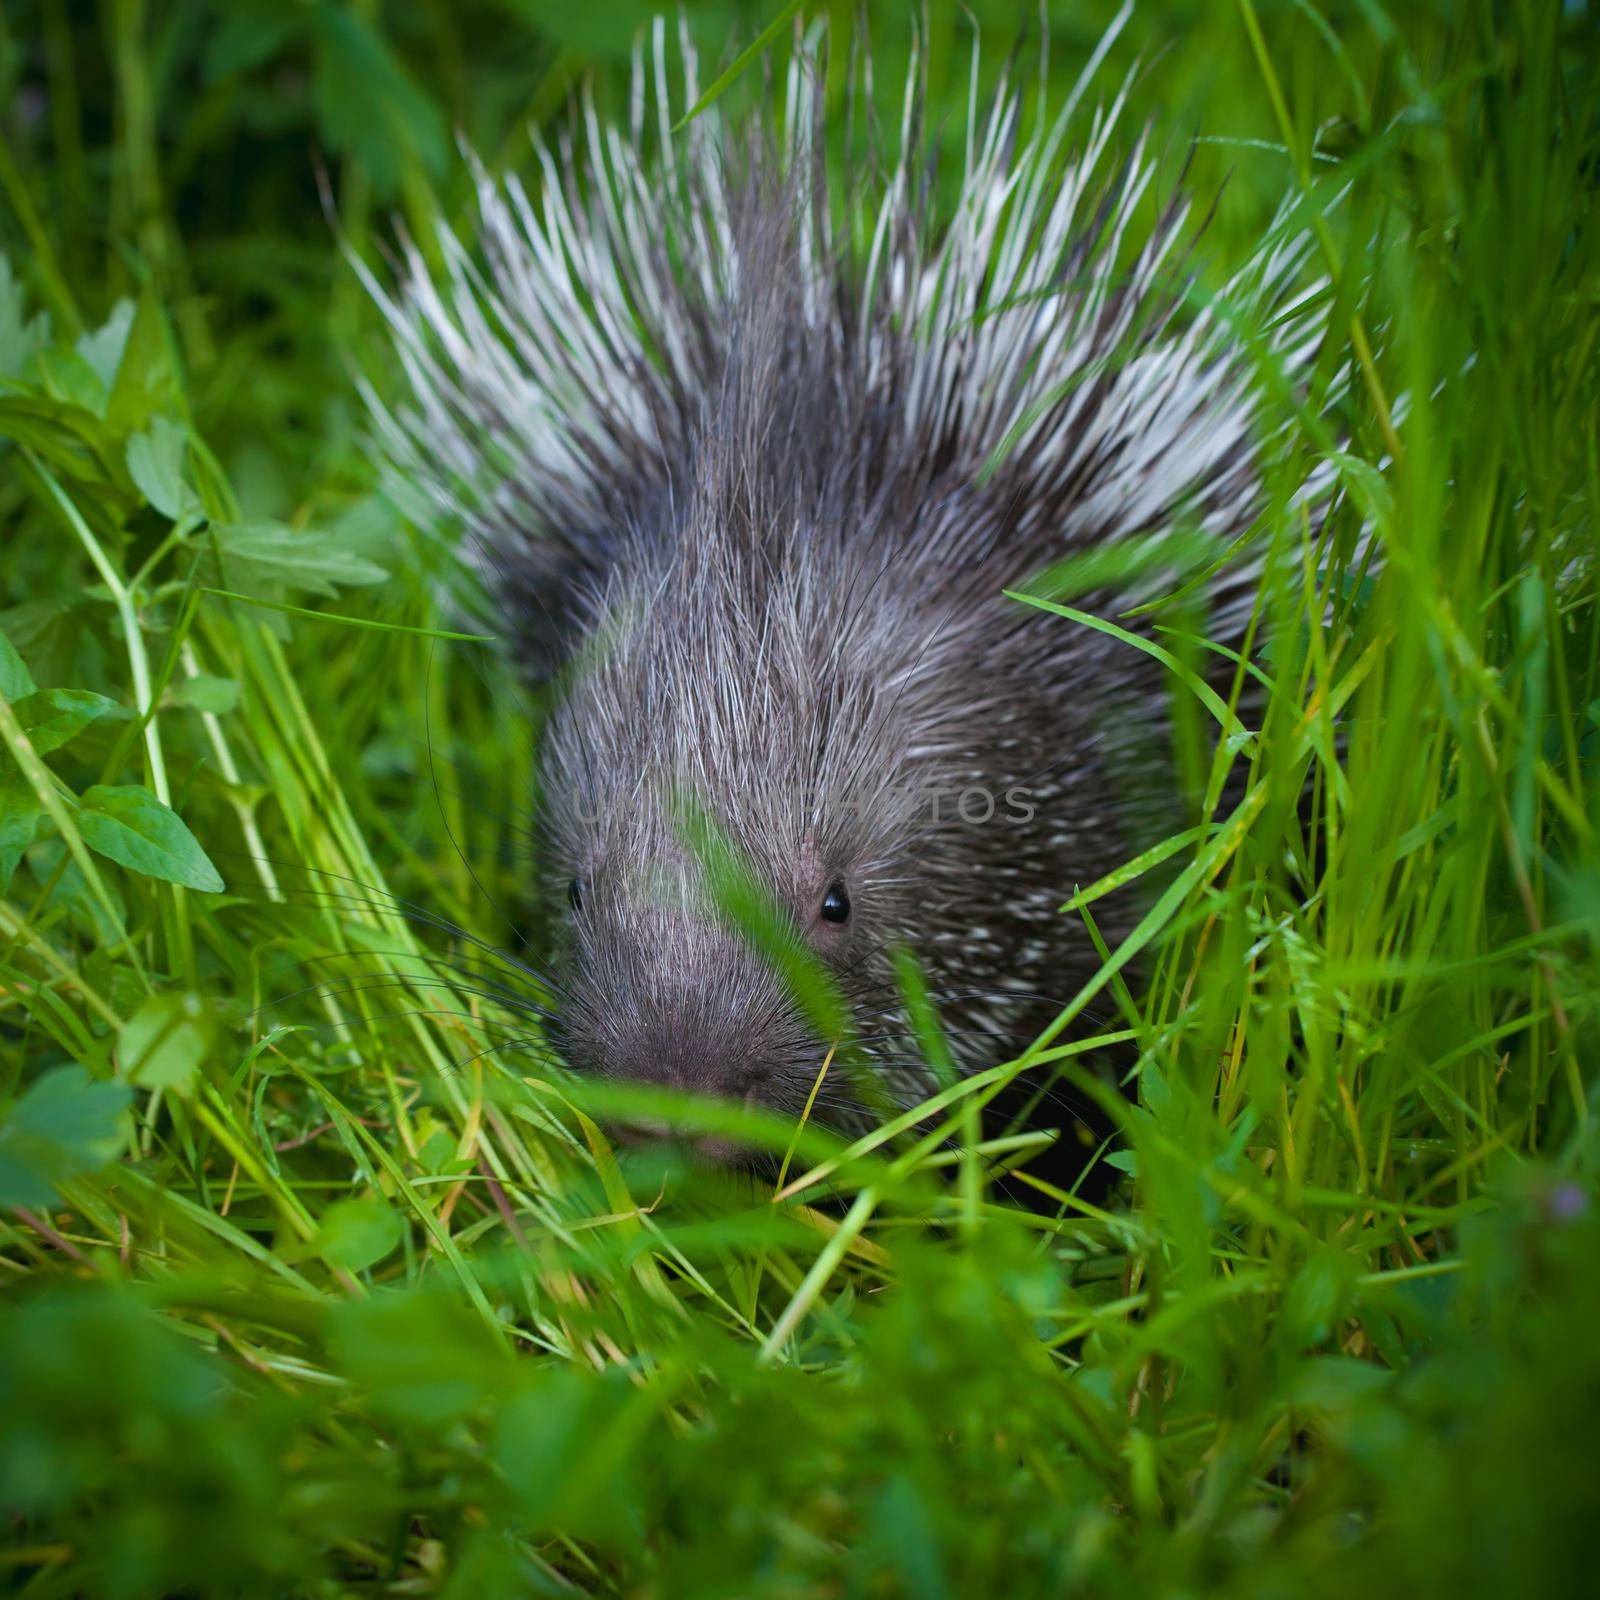 Indian crested Porcupine baby on grass in garden by RosaJay